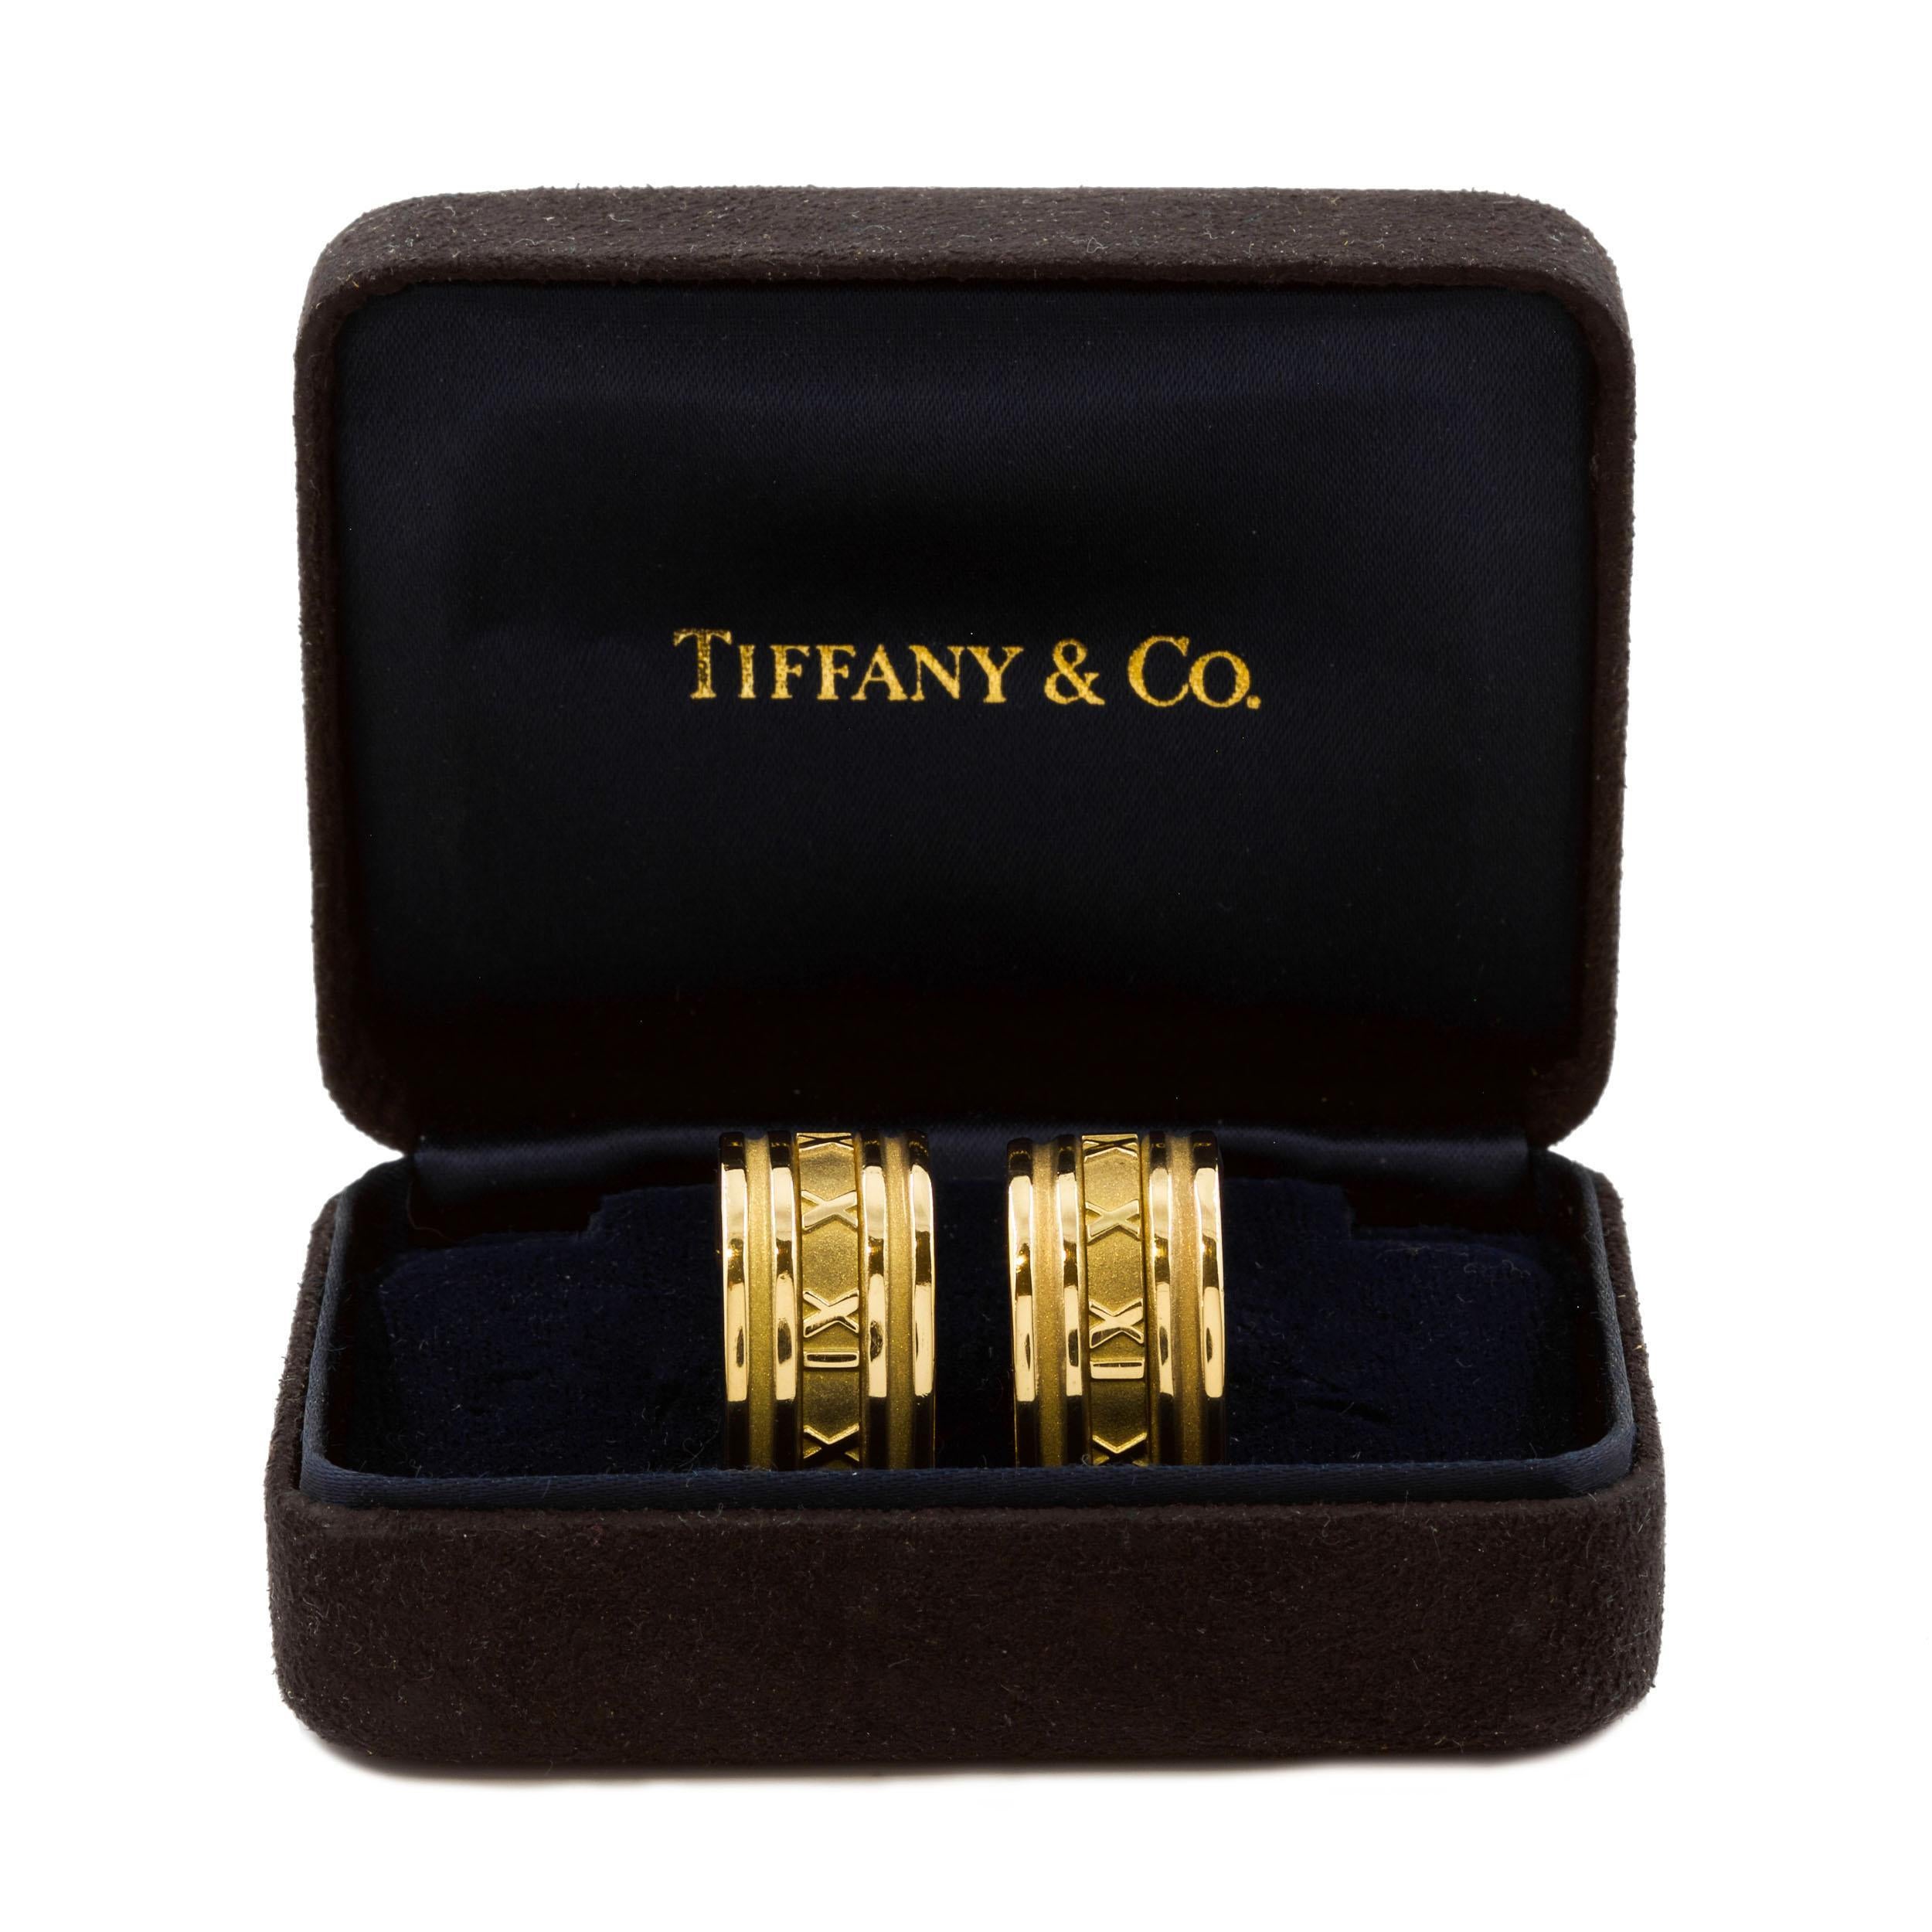 A truly iconic pair of earrings from the Tiffany & Co. 